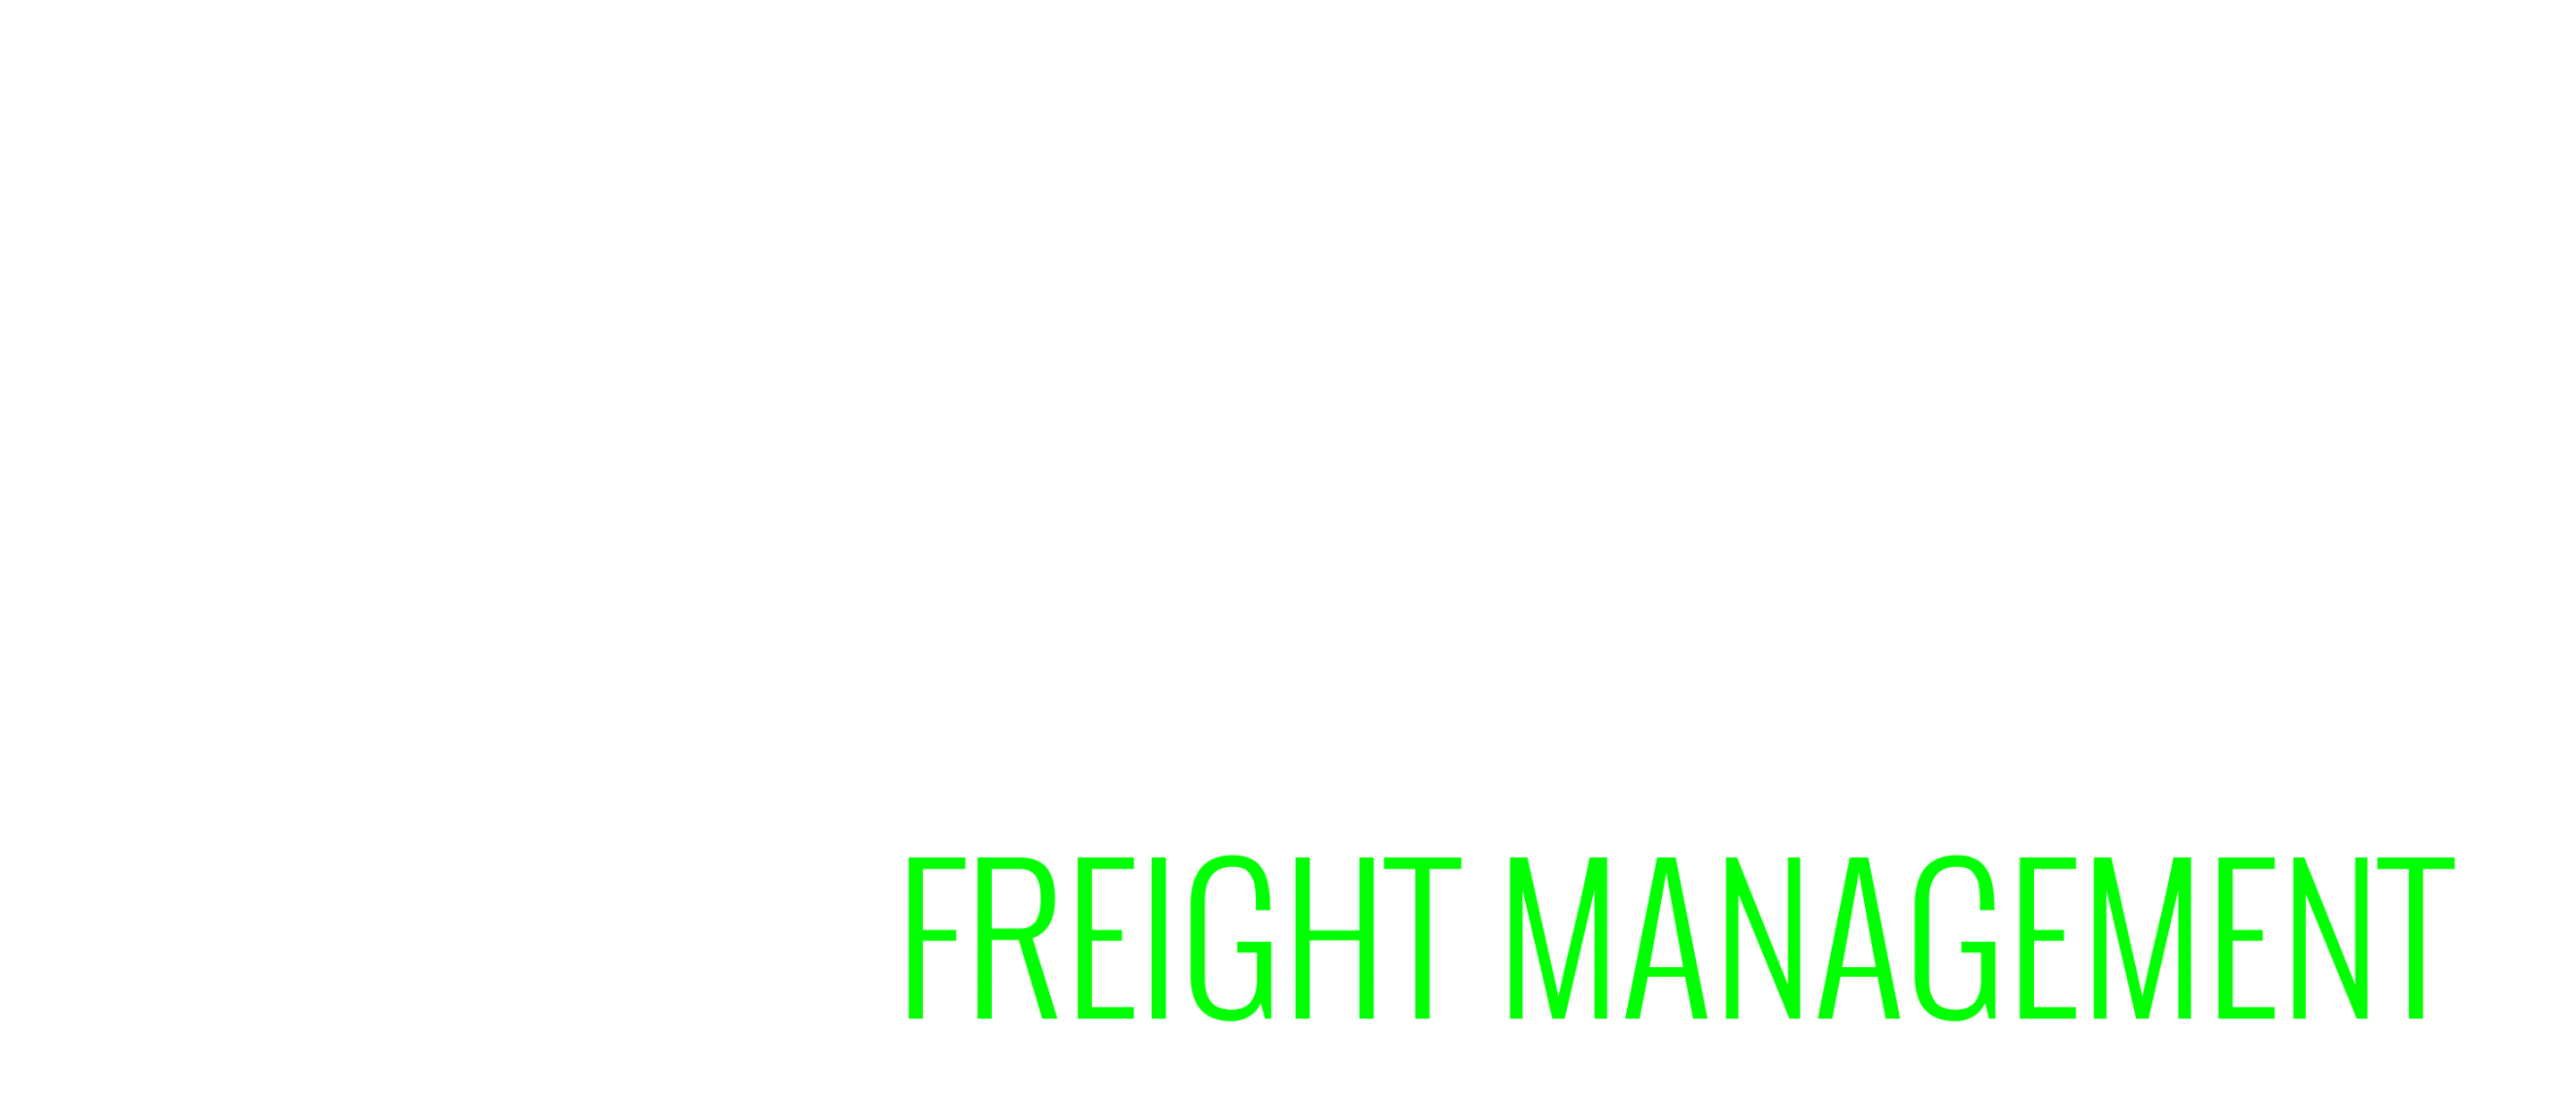 Ward Logistics Freight Management Logo: Ward in large white letters italicized with LOGISTICS smaller under in white and then FREIGHT MANAGEMENT in apple green